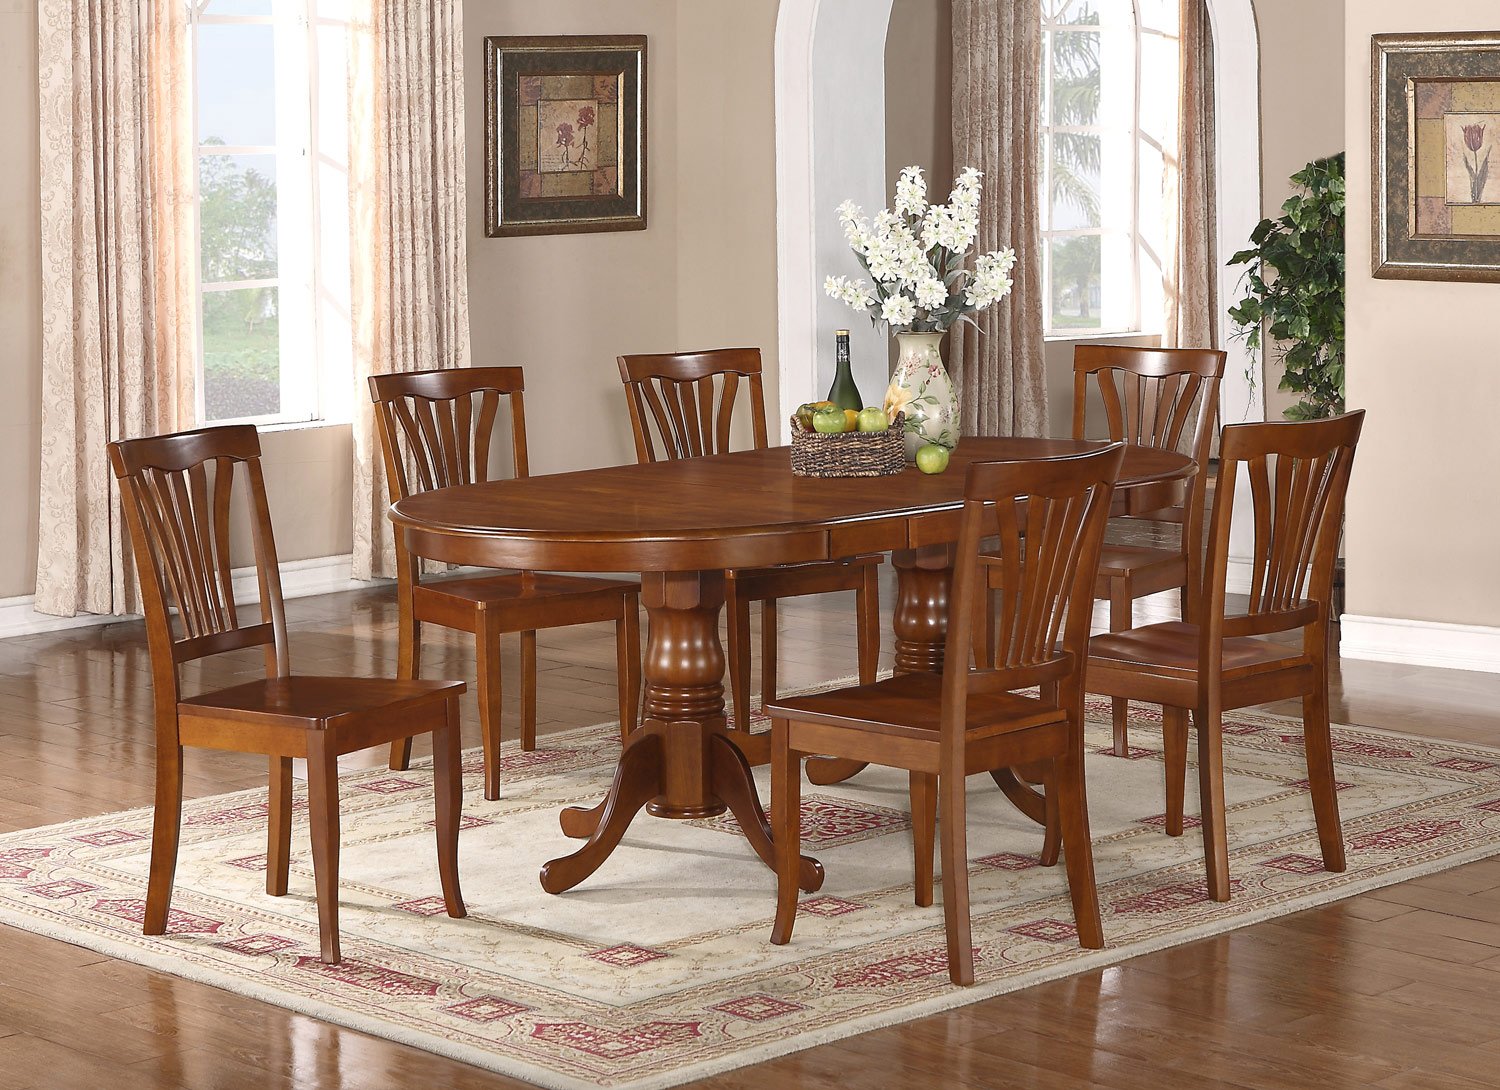 Oval Dining Room Table For 8